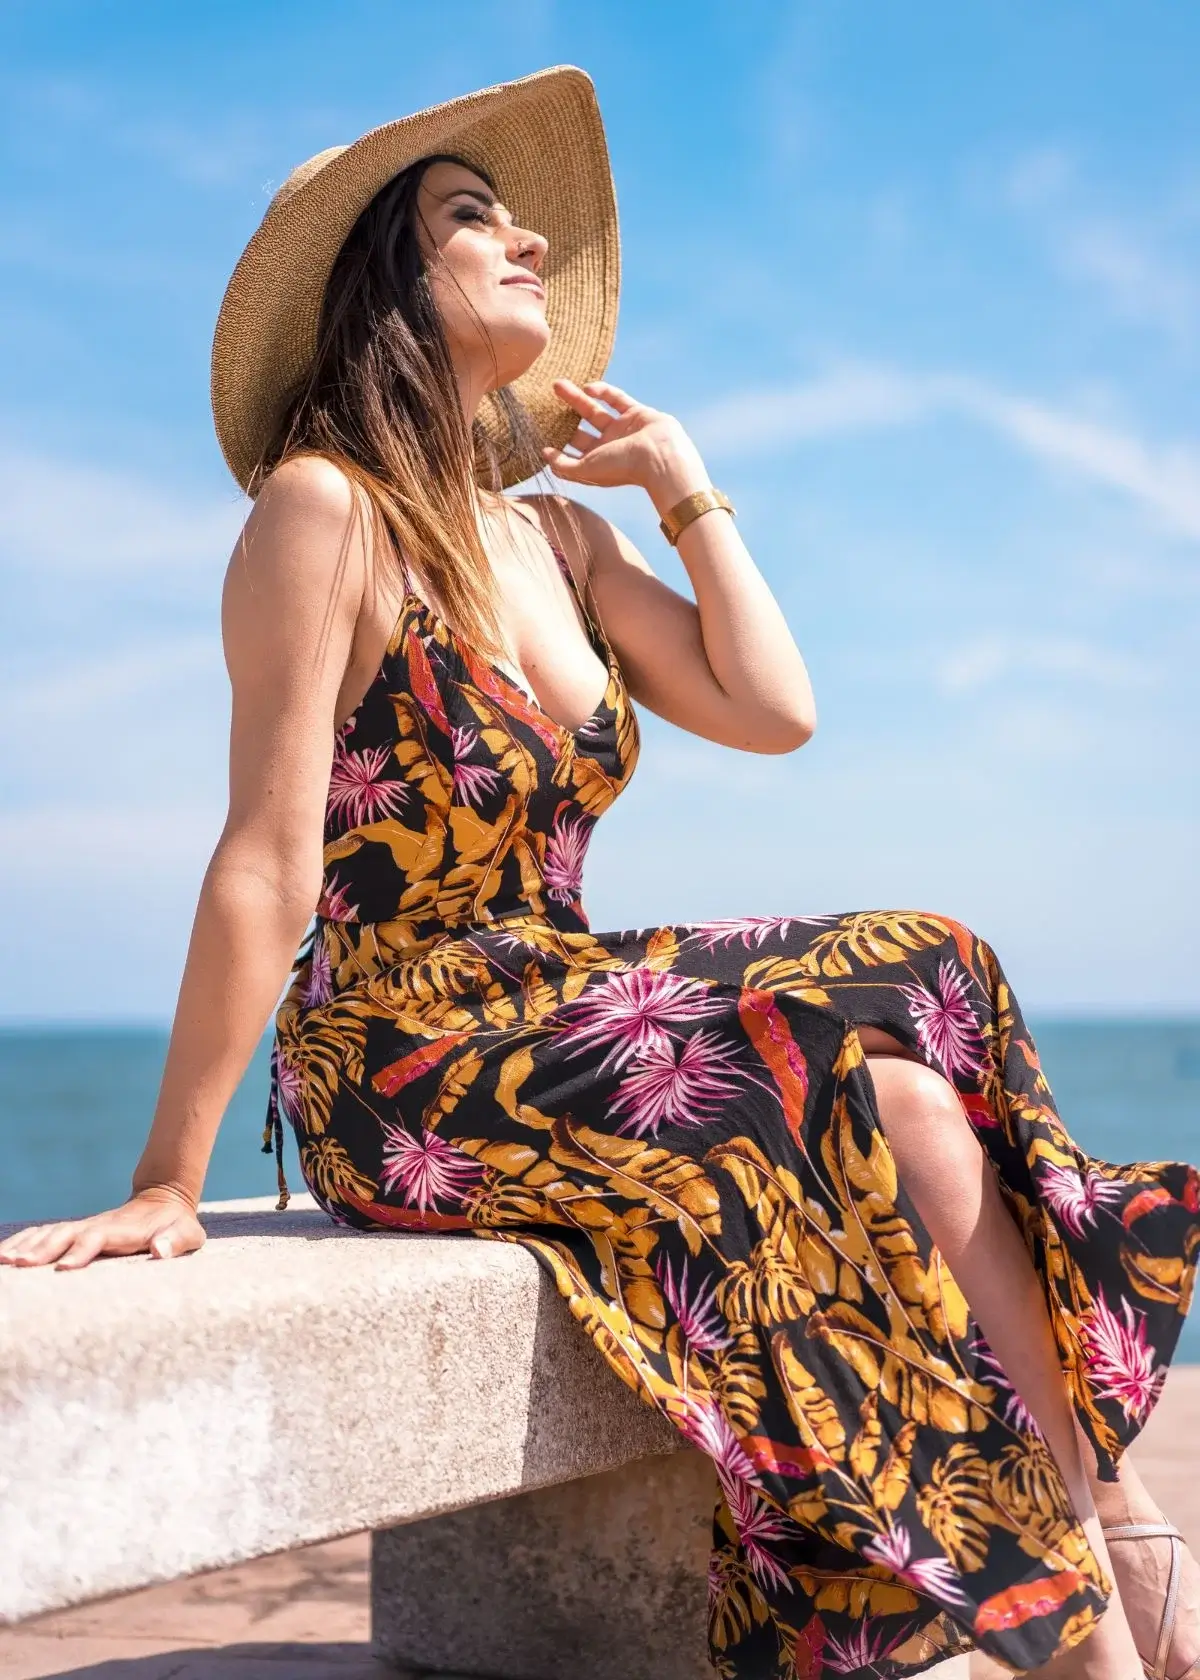 How to choose the right summer dresses?